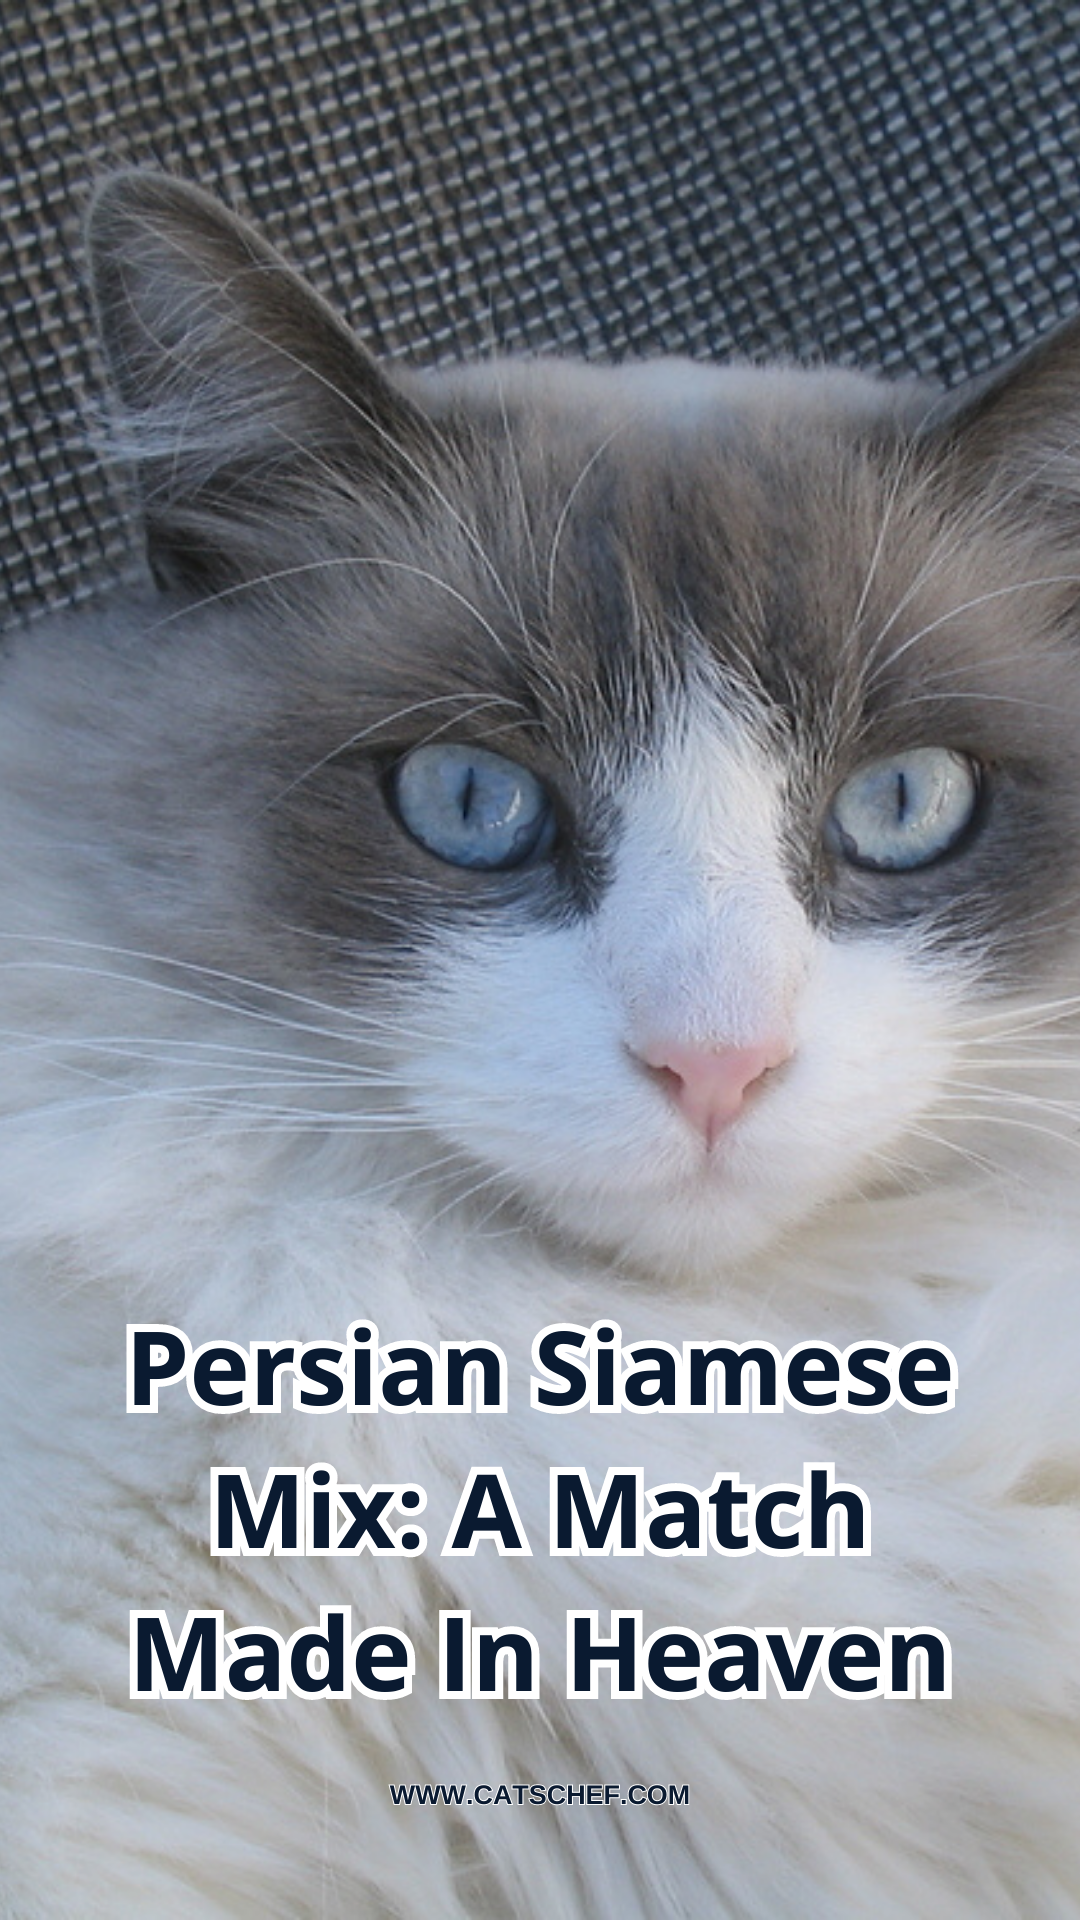 Persian Siamese Mix: A Match Made In Heaven